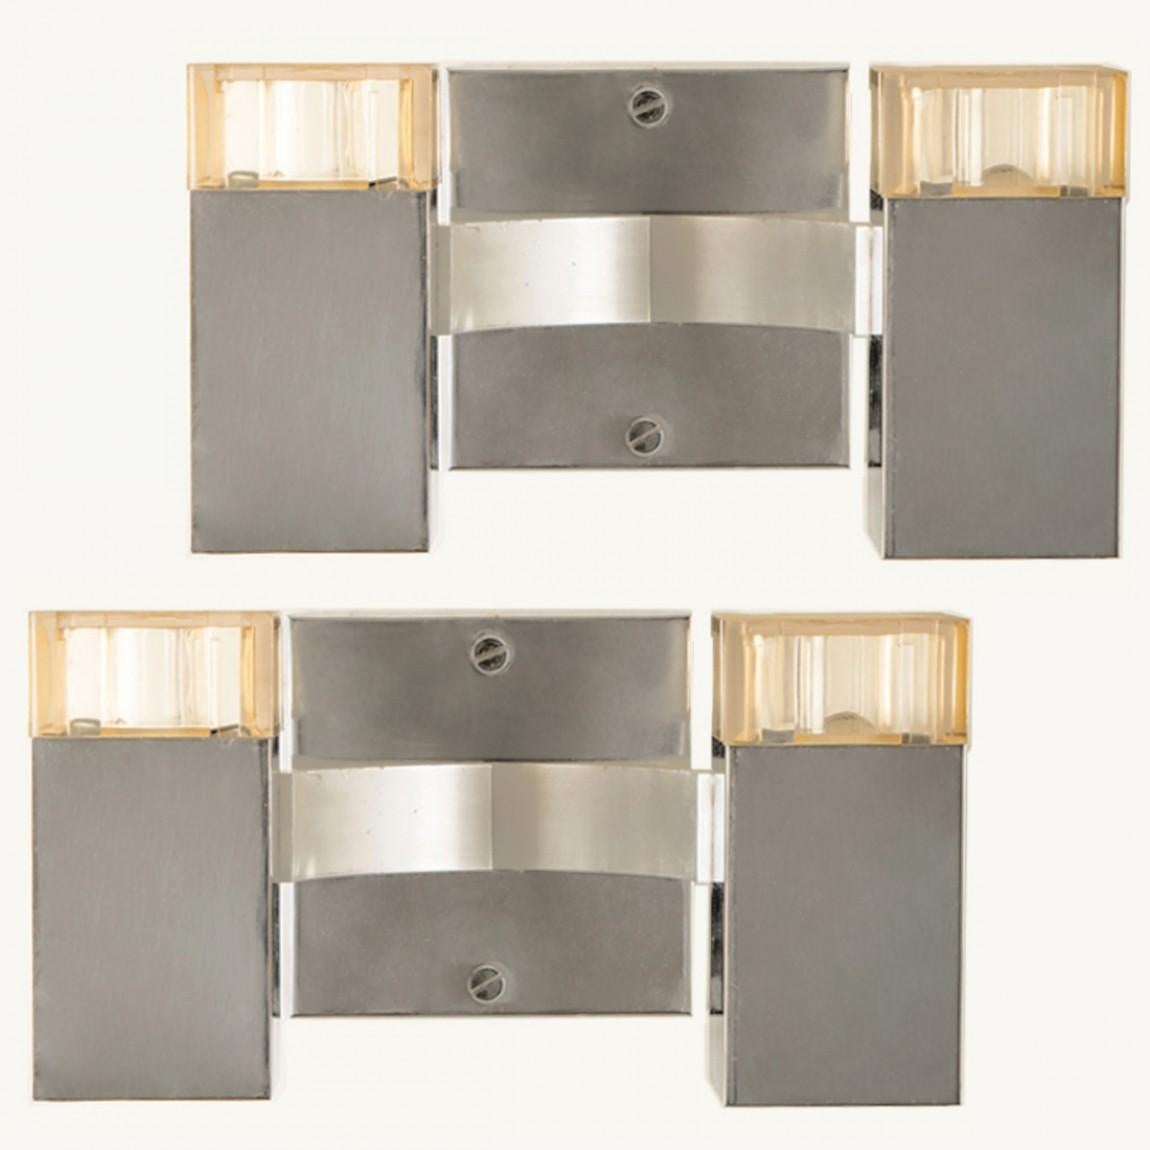 A pair of geometric wall fixtures, designed by Gaetano Sciolari in Italy in the 1960s.
They are composed of two rectangular tubes with a chrome finish. The light is also rectangular shaped.
Because of the highly polished surface, the lamp creates